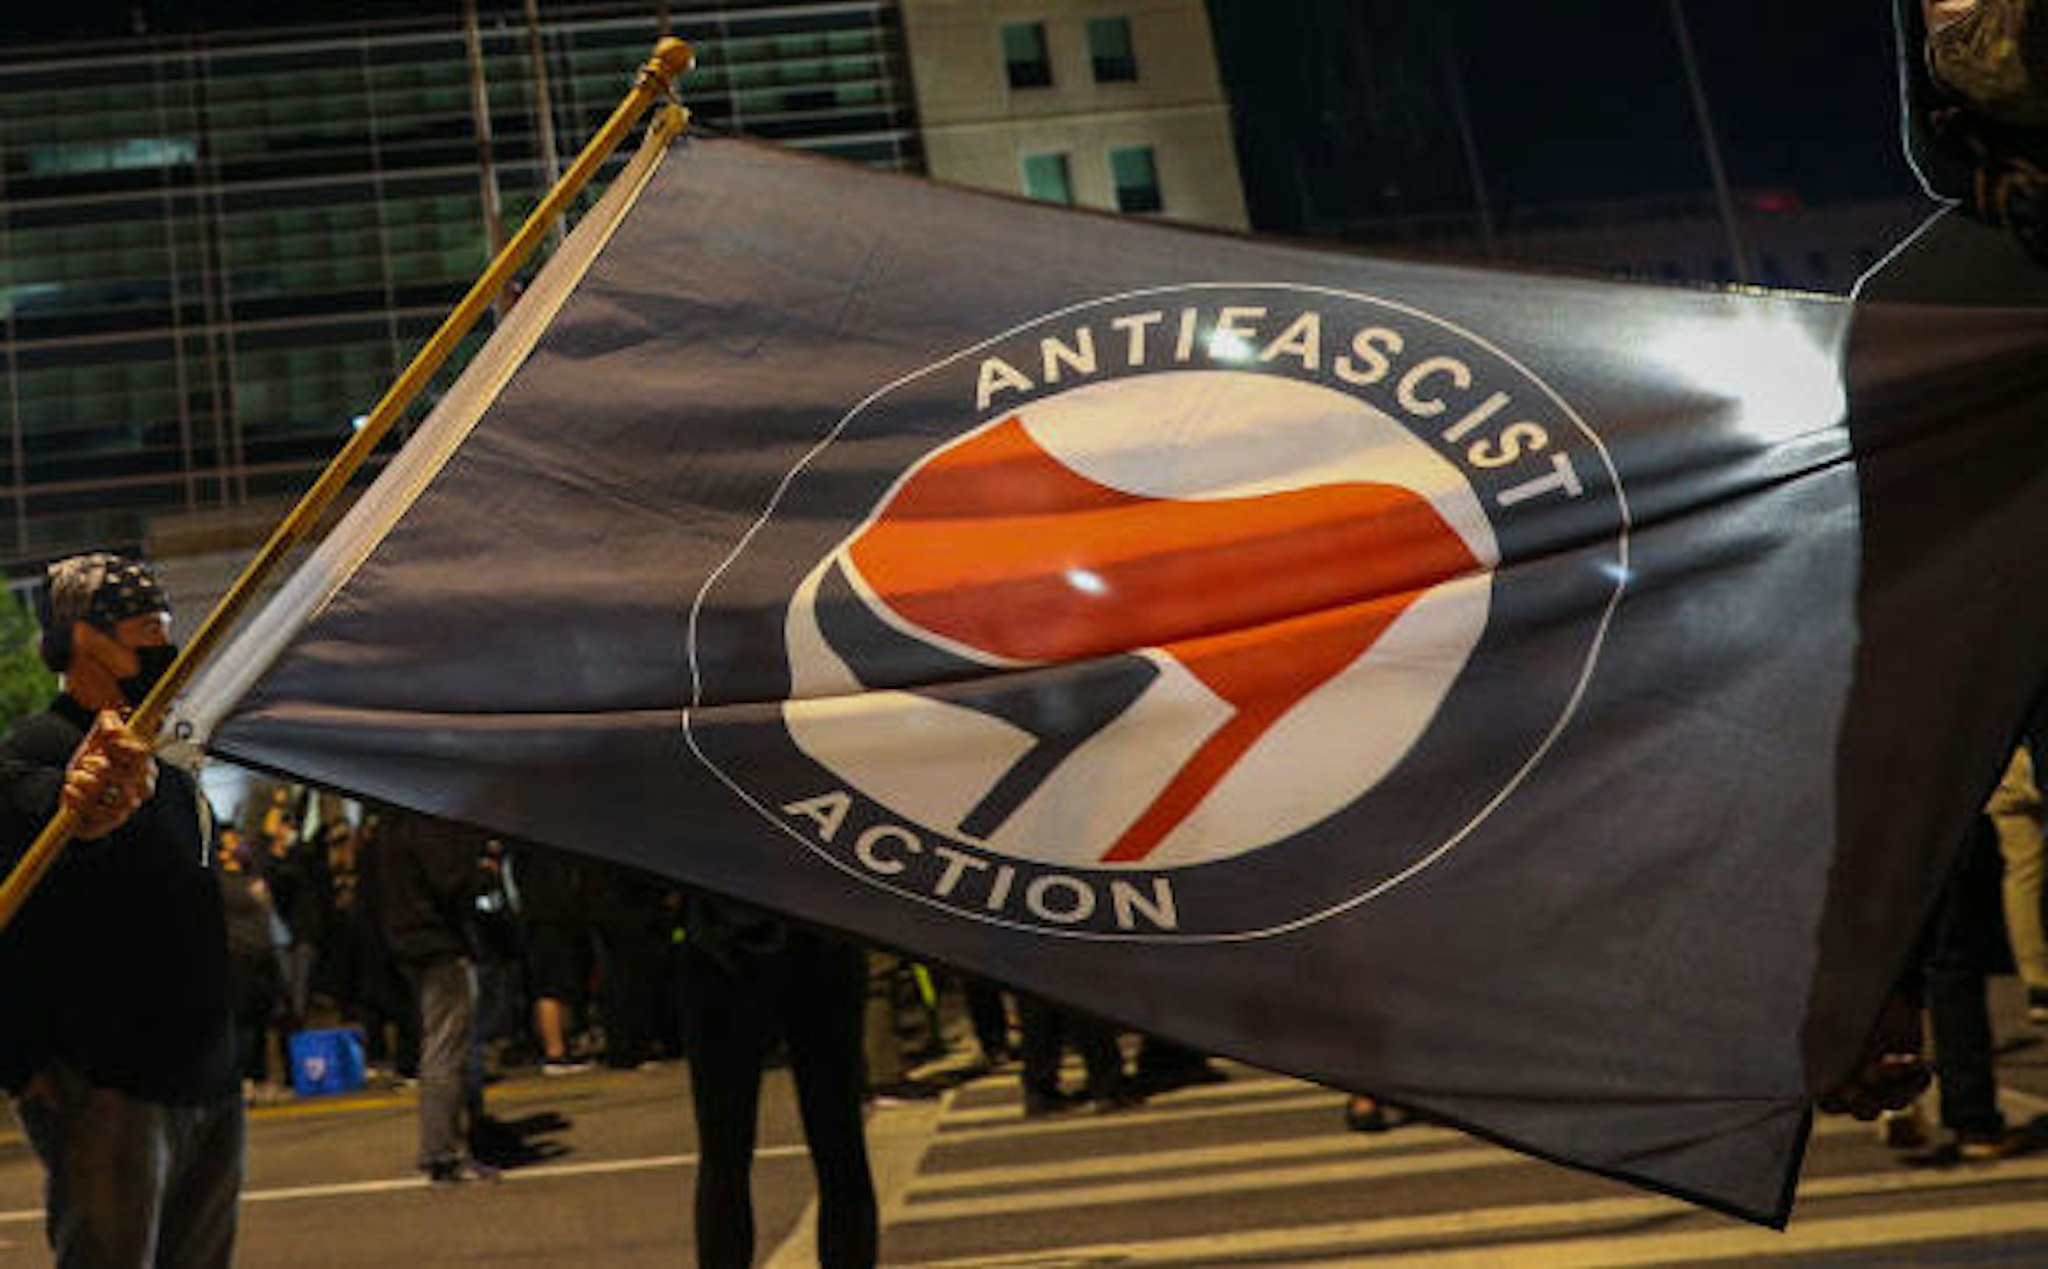 A man holds an anti-fascism flag as hundreds of demonstrators gather and march to the City Public Safety Building over Daniel Prudeâs death in Rochester, New York, United States on September 6, 2020. Daniel Prude, an unarmed black man who died after being arrested and being placed a "spit hood" over his head by Rochester police. (Photo by Tayfun Coskun/Anadolu Agency via Getty Images)